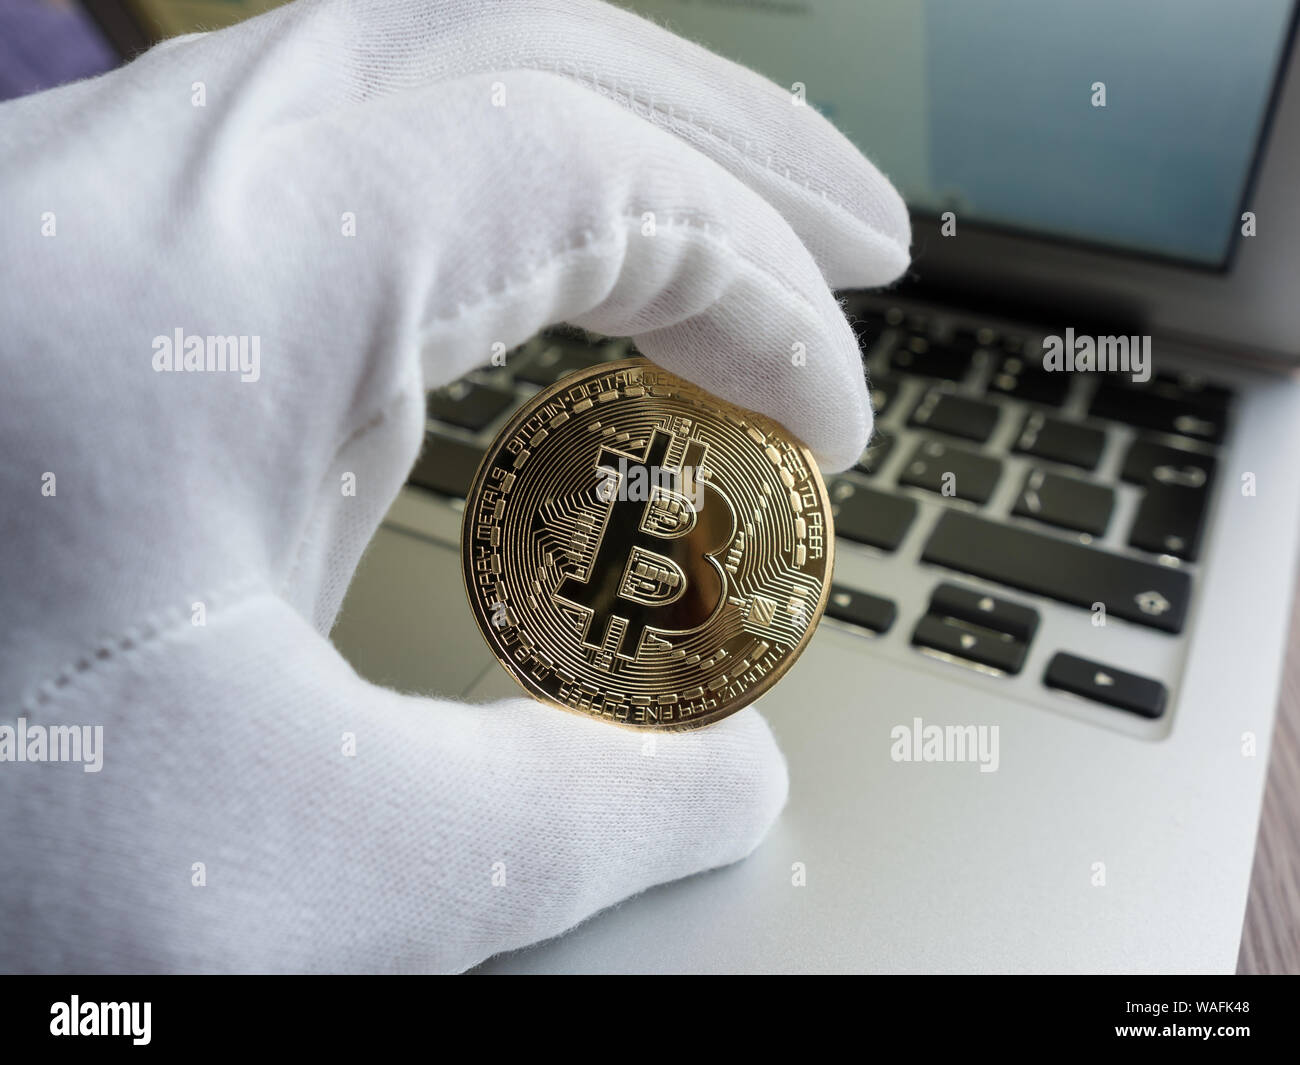 Men in white glove holding golden bitcoin against laptop. Focus on the coin. Stock Photo